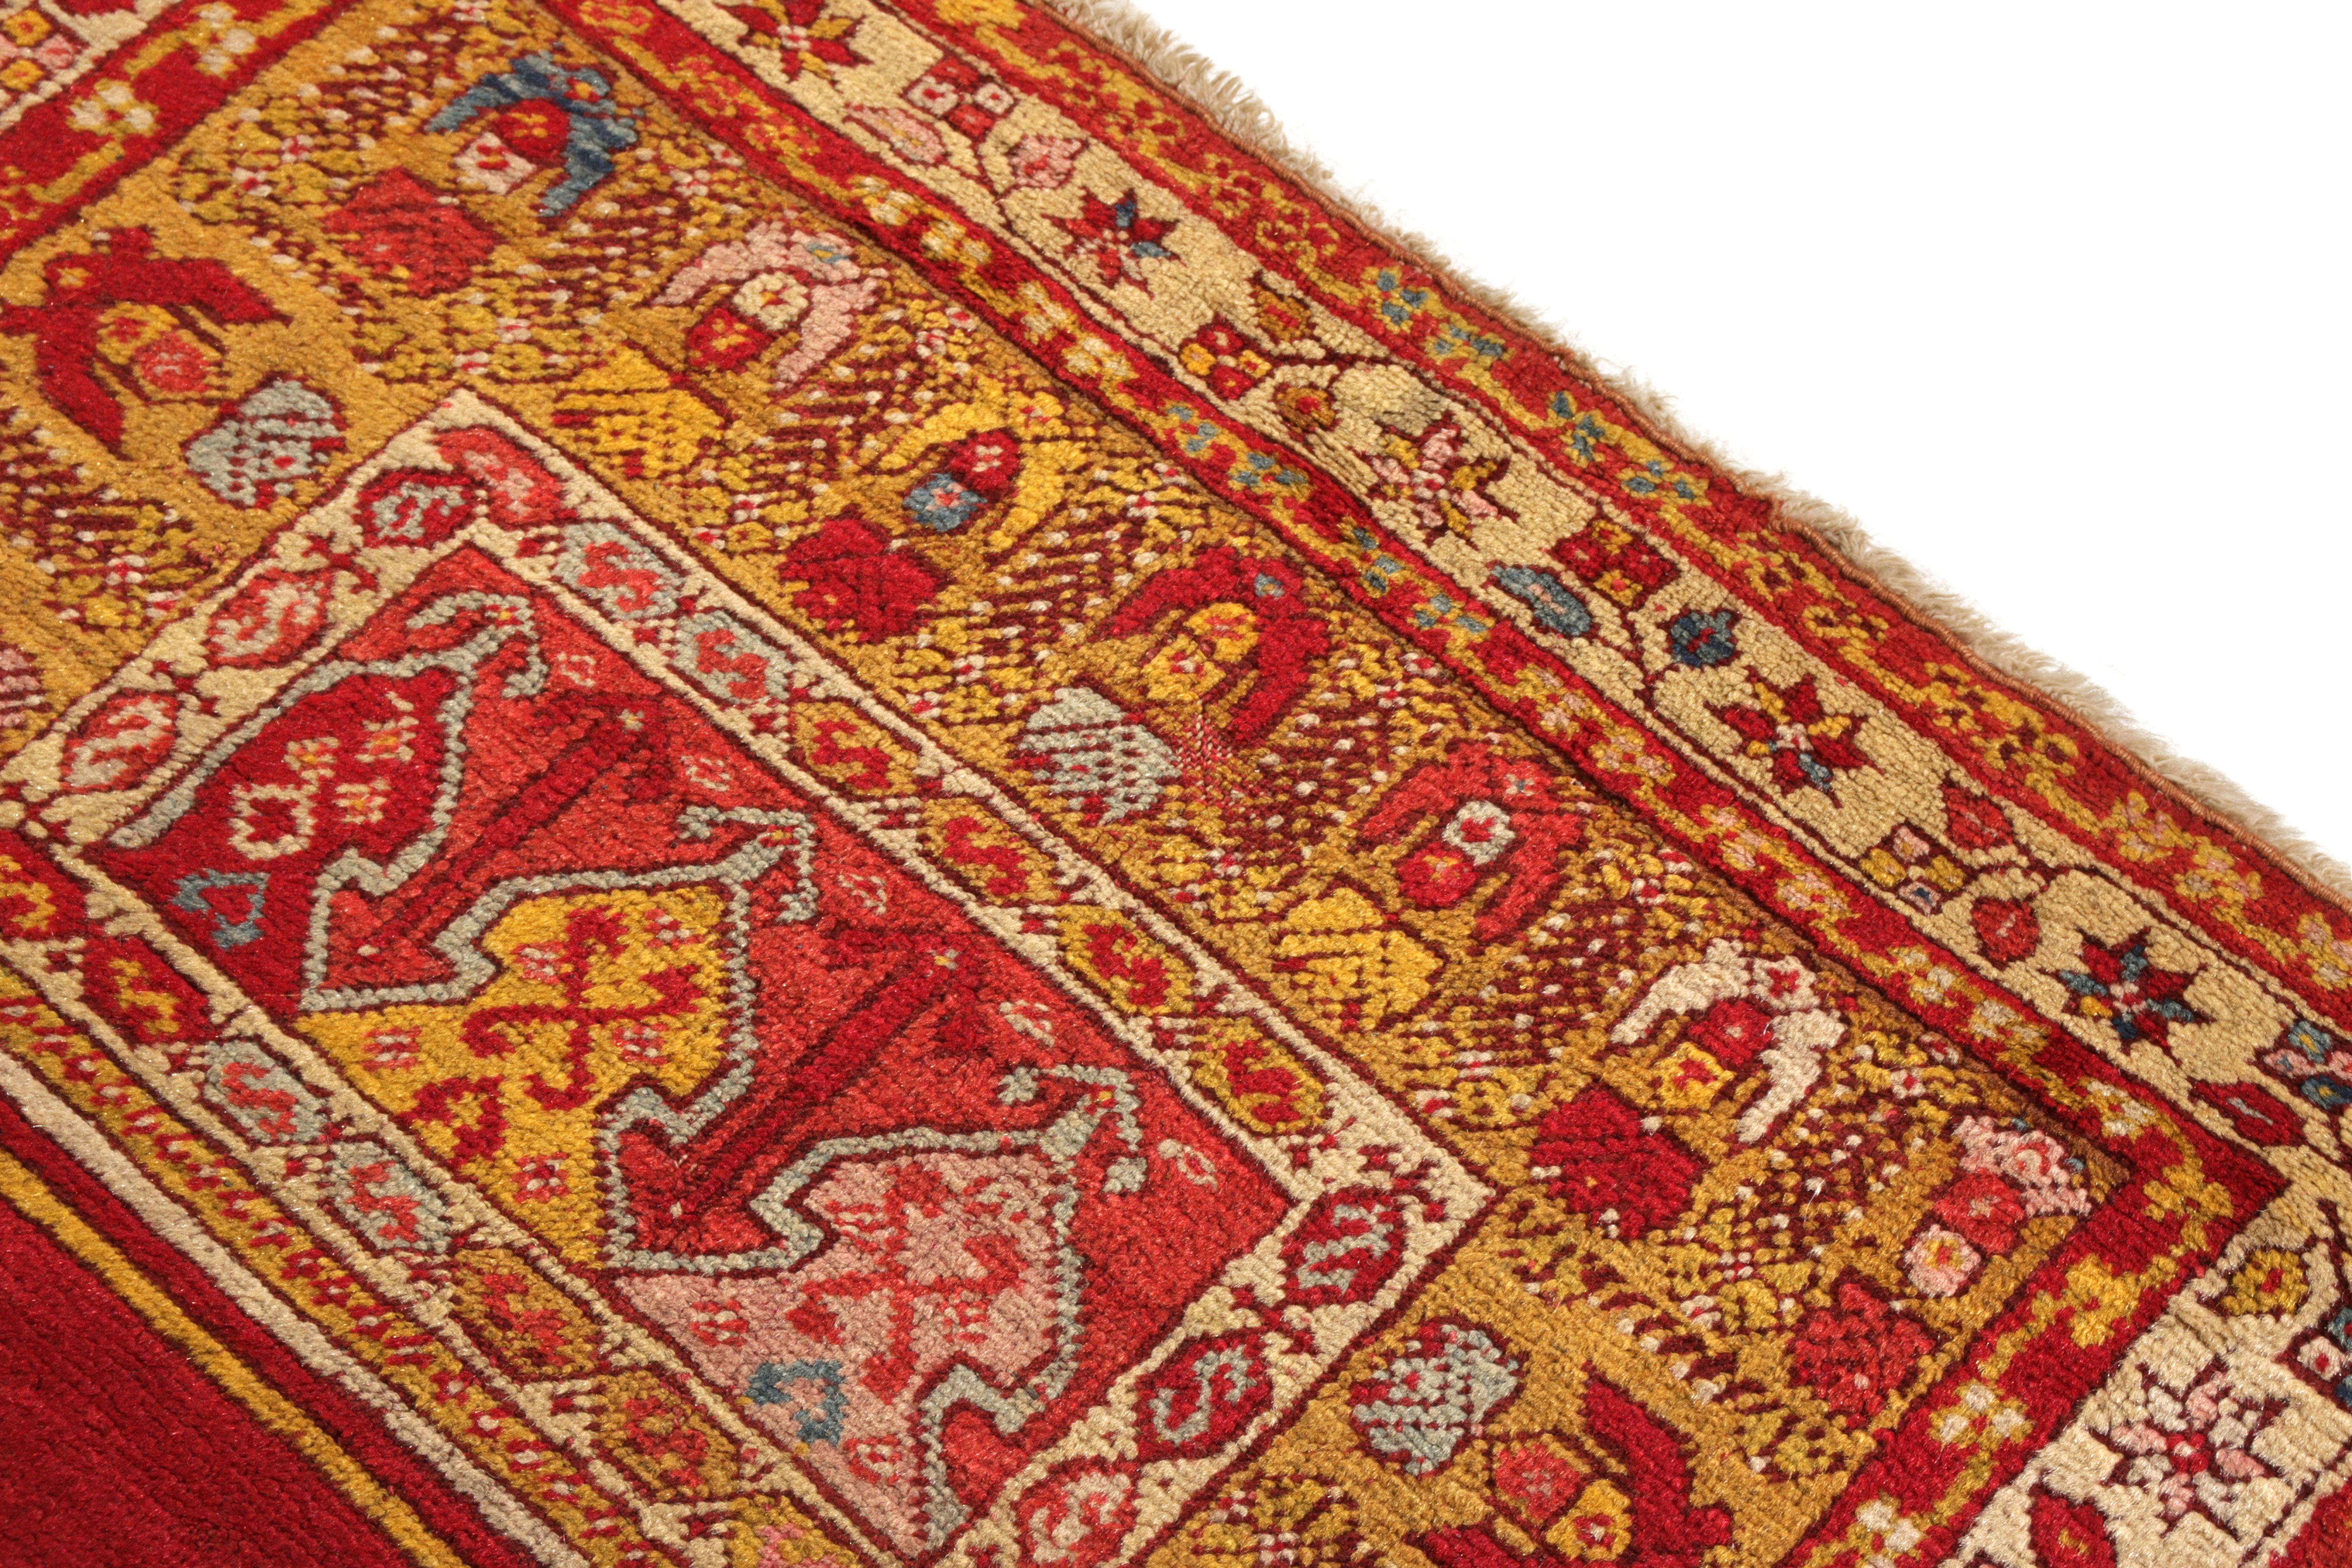 Islamic Hand Knotted Antique Karshi Persian Rug in Gold and Red Mihrab Pattern